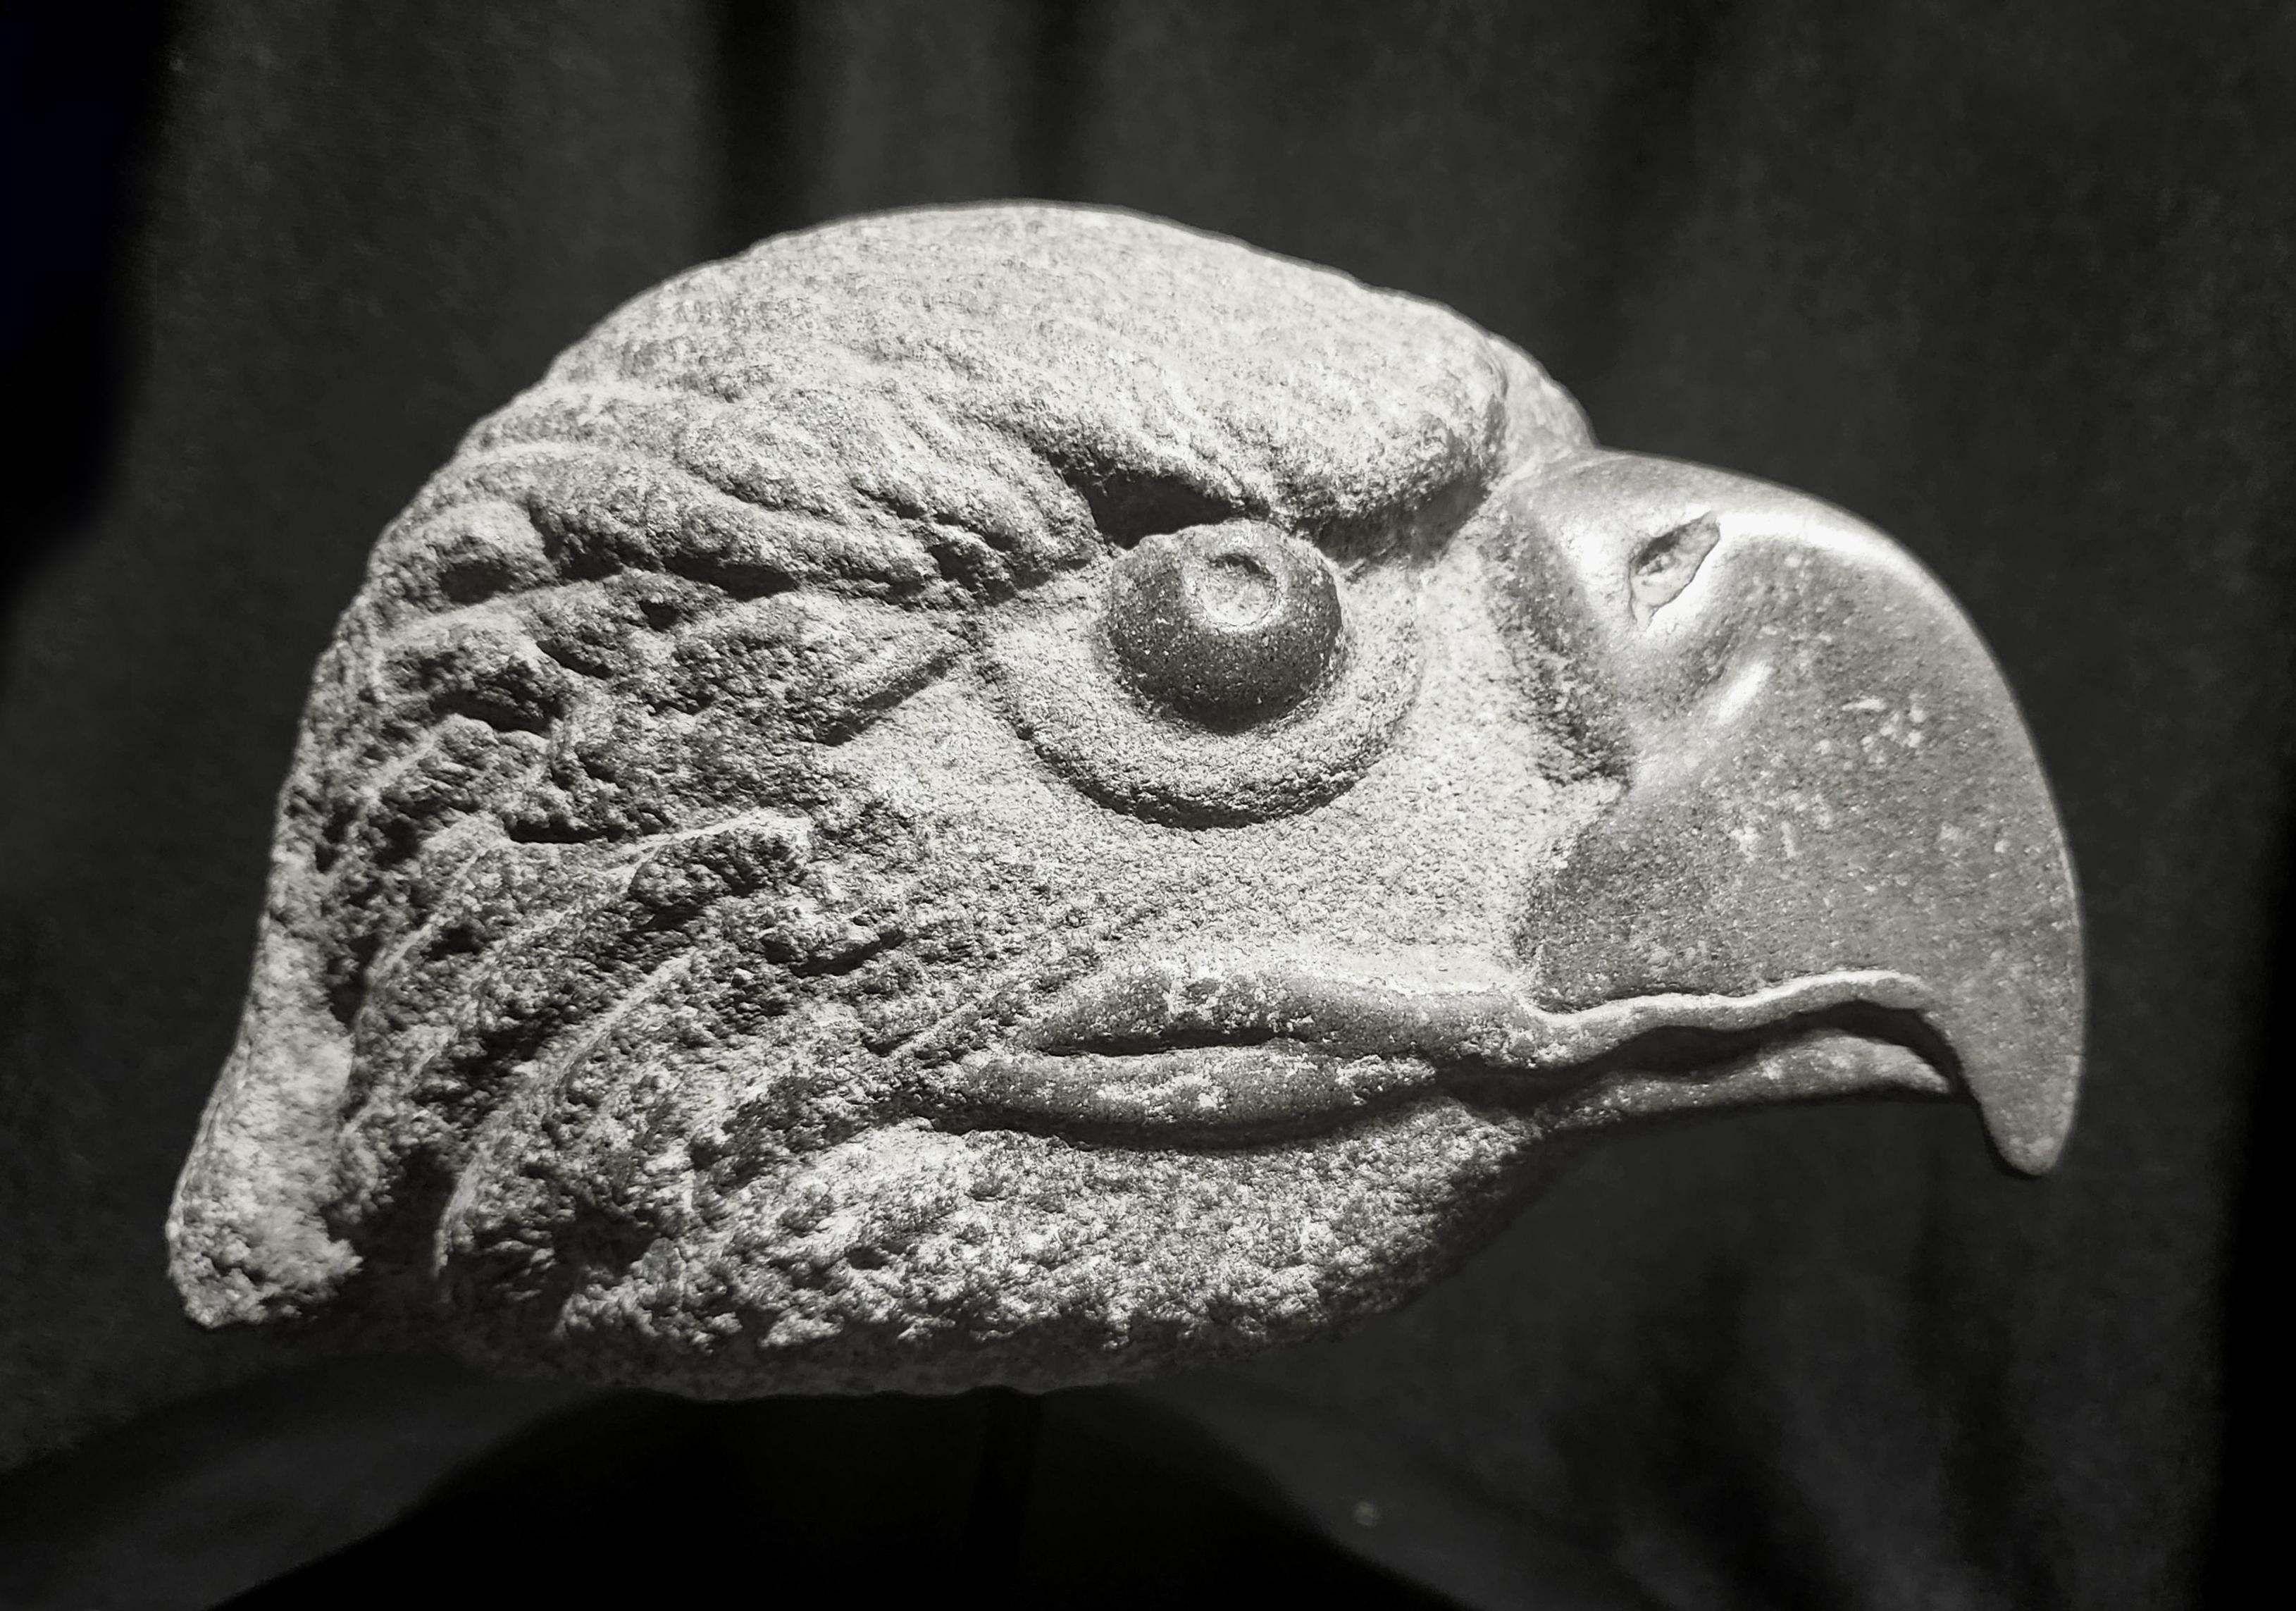 Magnificent Aztec Basalt Eagle head, with powerful hooked beak, piercing 
eyes, and a fully-feathered head.

The sculptor Highlighted the power of the head by finely burnishing the beak and eyes to create a strong contrast with the rough surface of